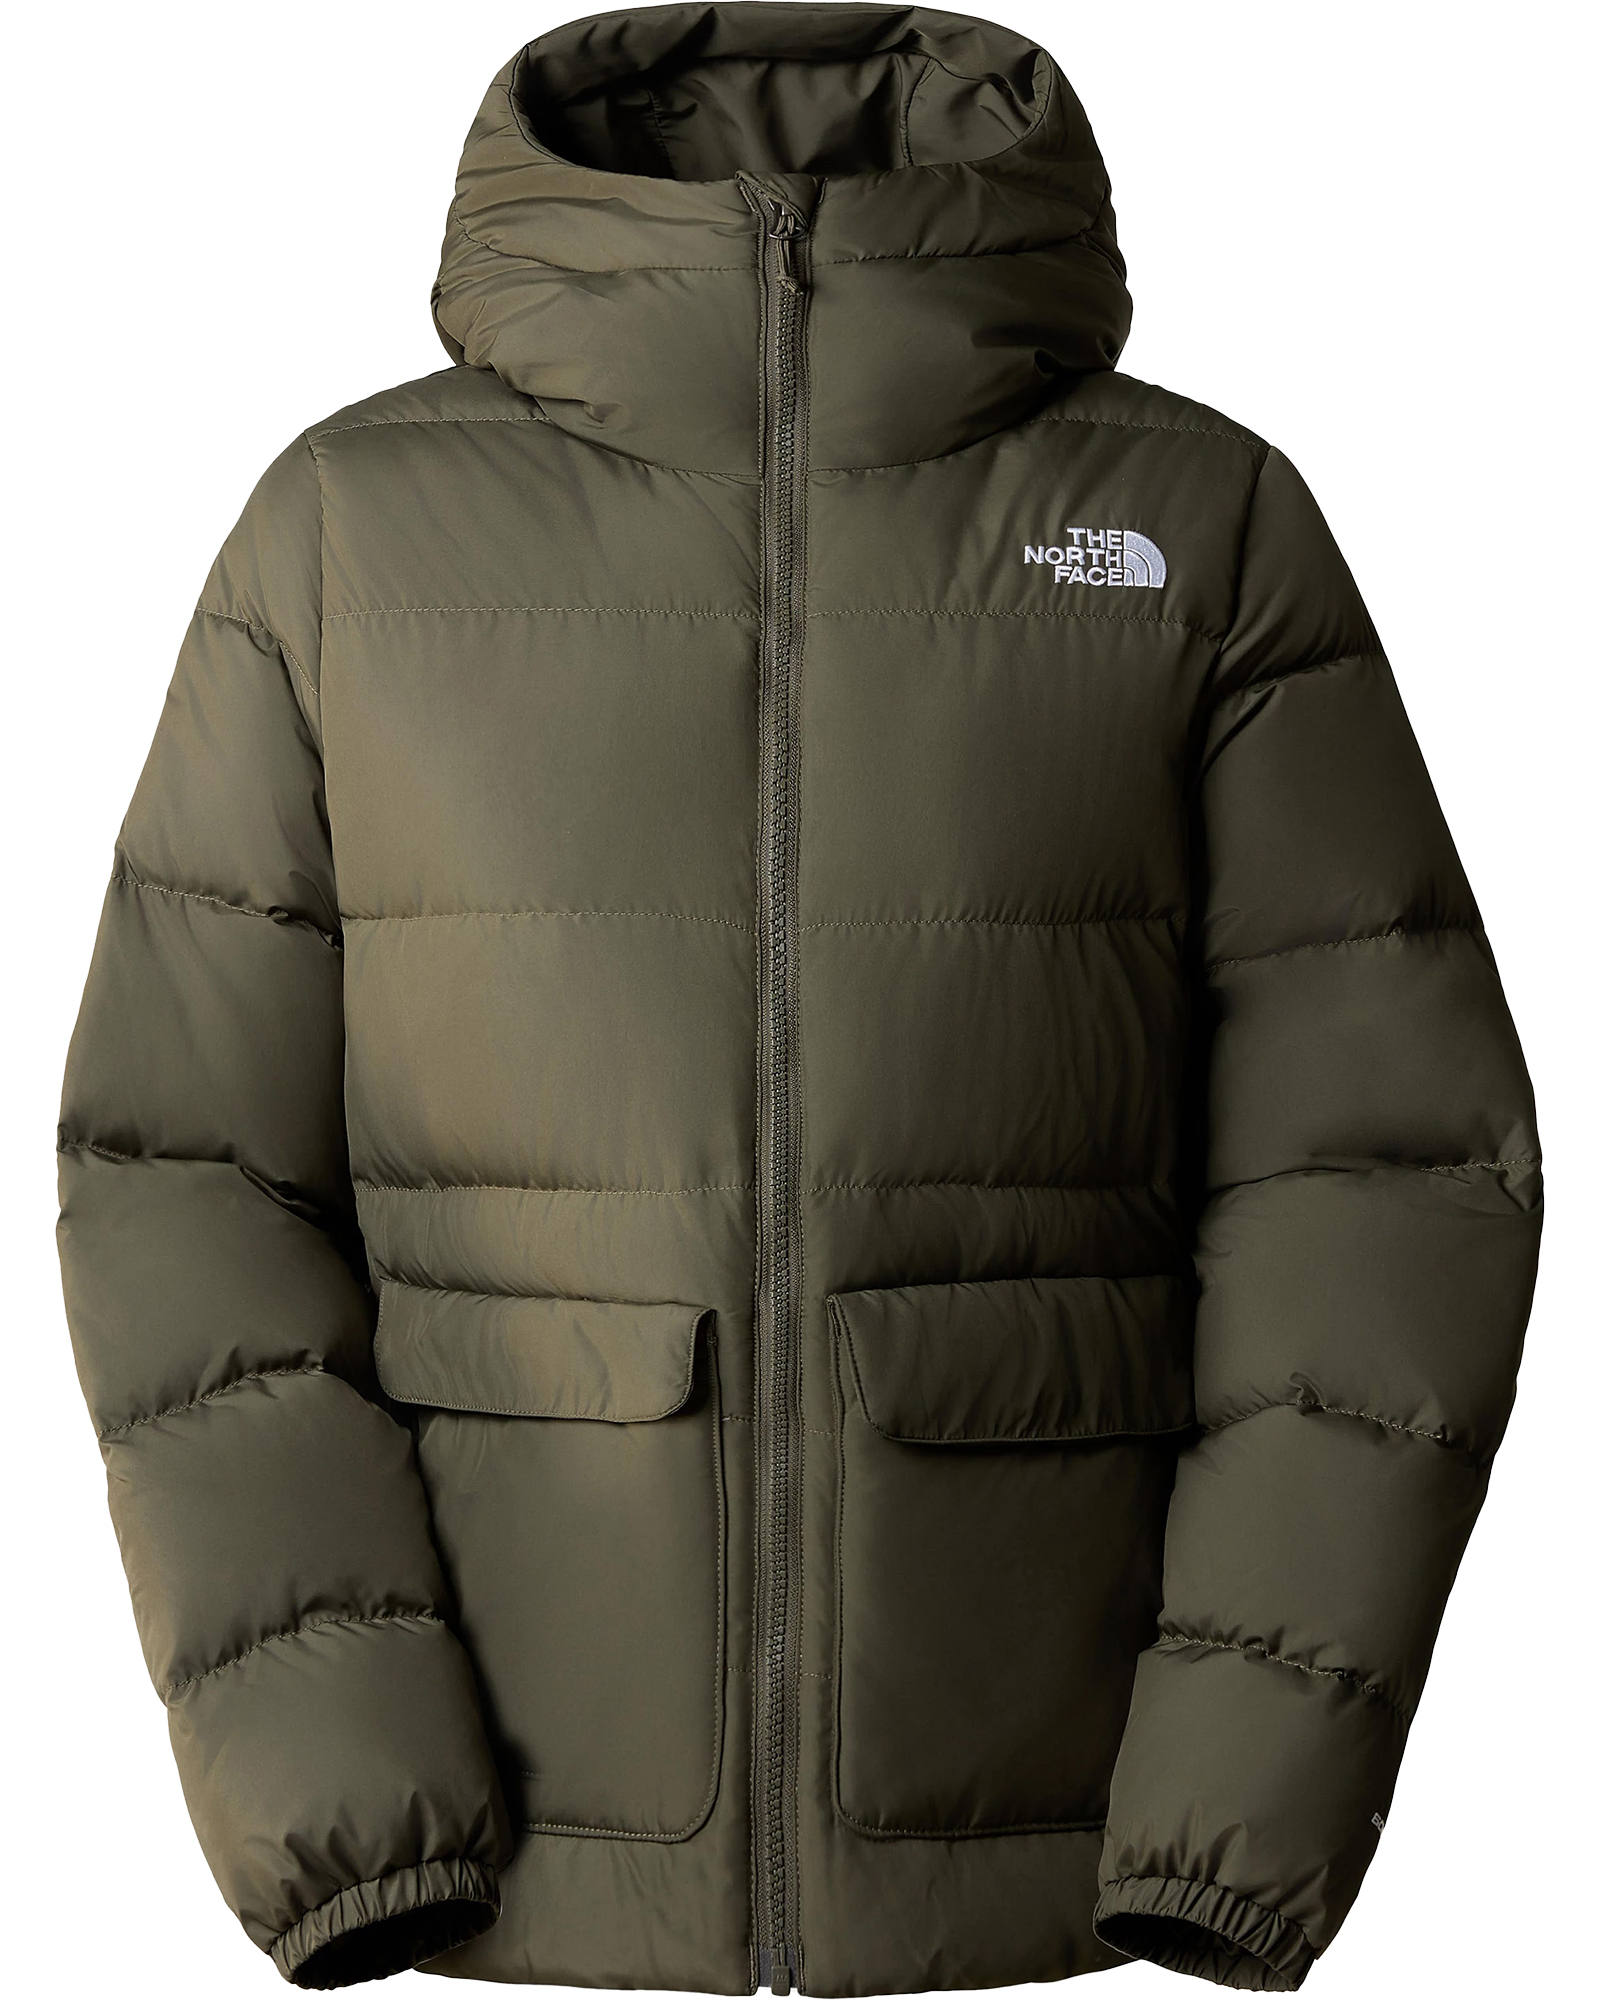 The North Face Women’s Gotham Down Jacket - New Taupe Green XL